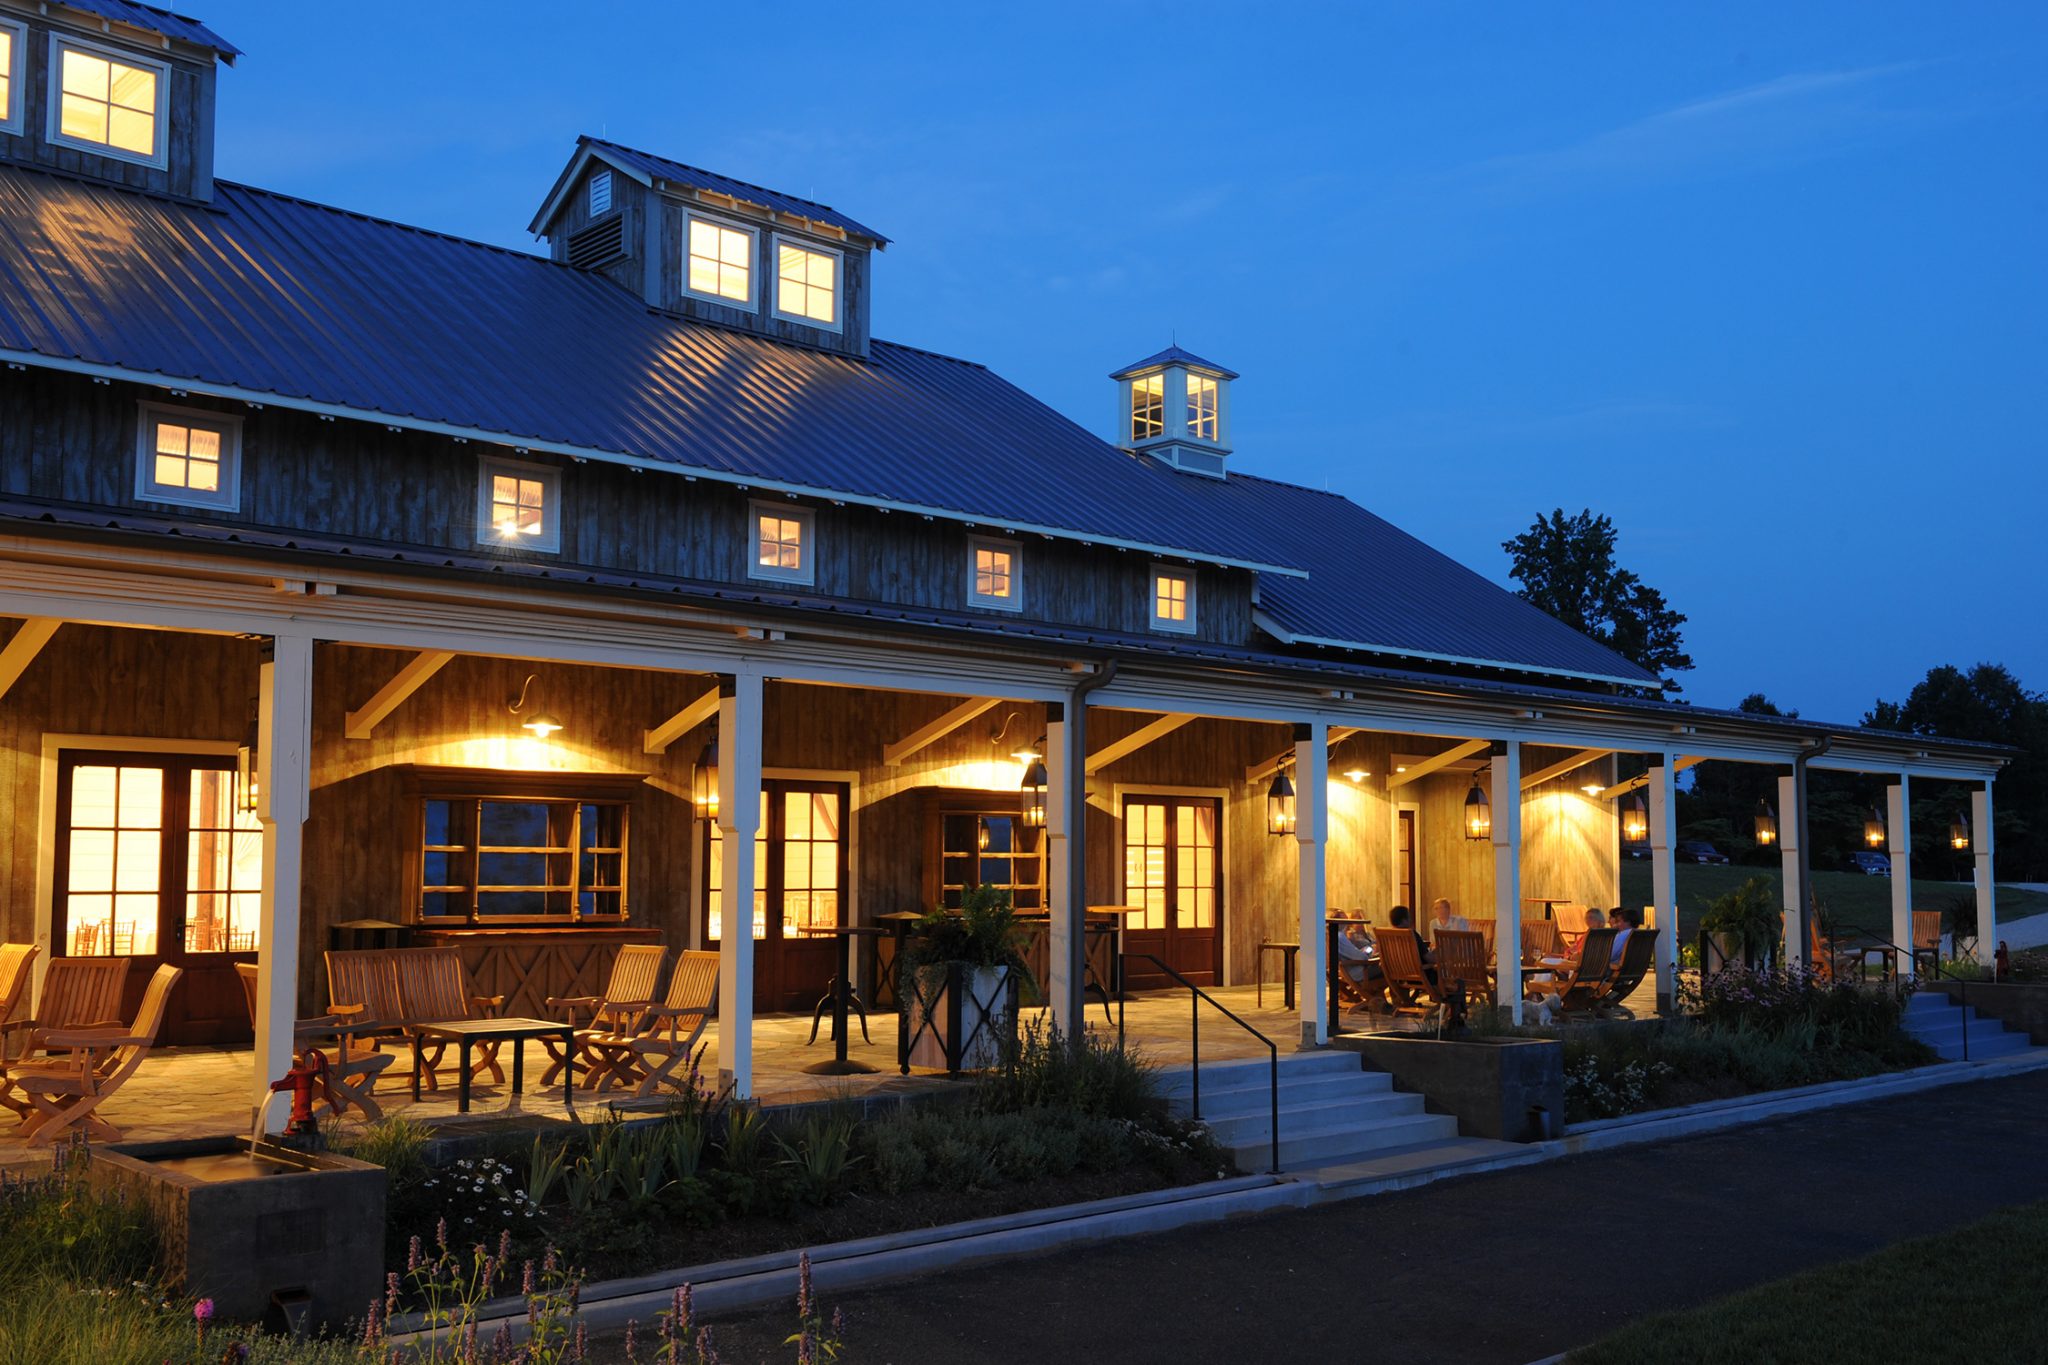 Pippin Hill Farm & Winery At Night